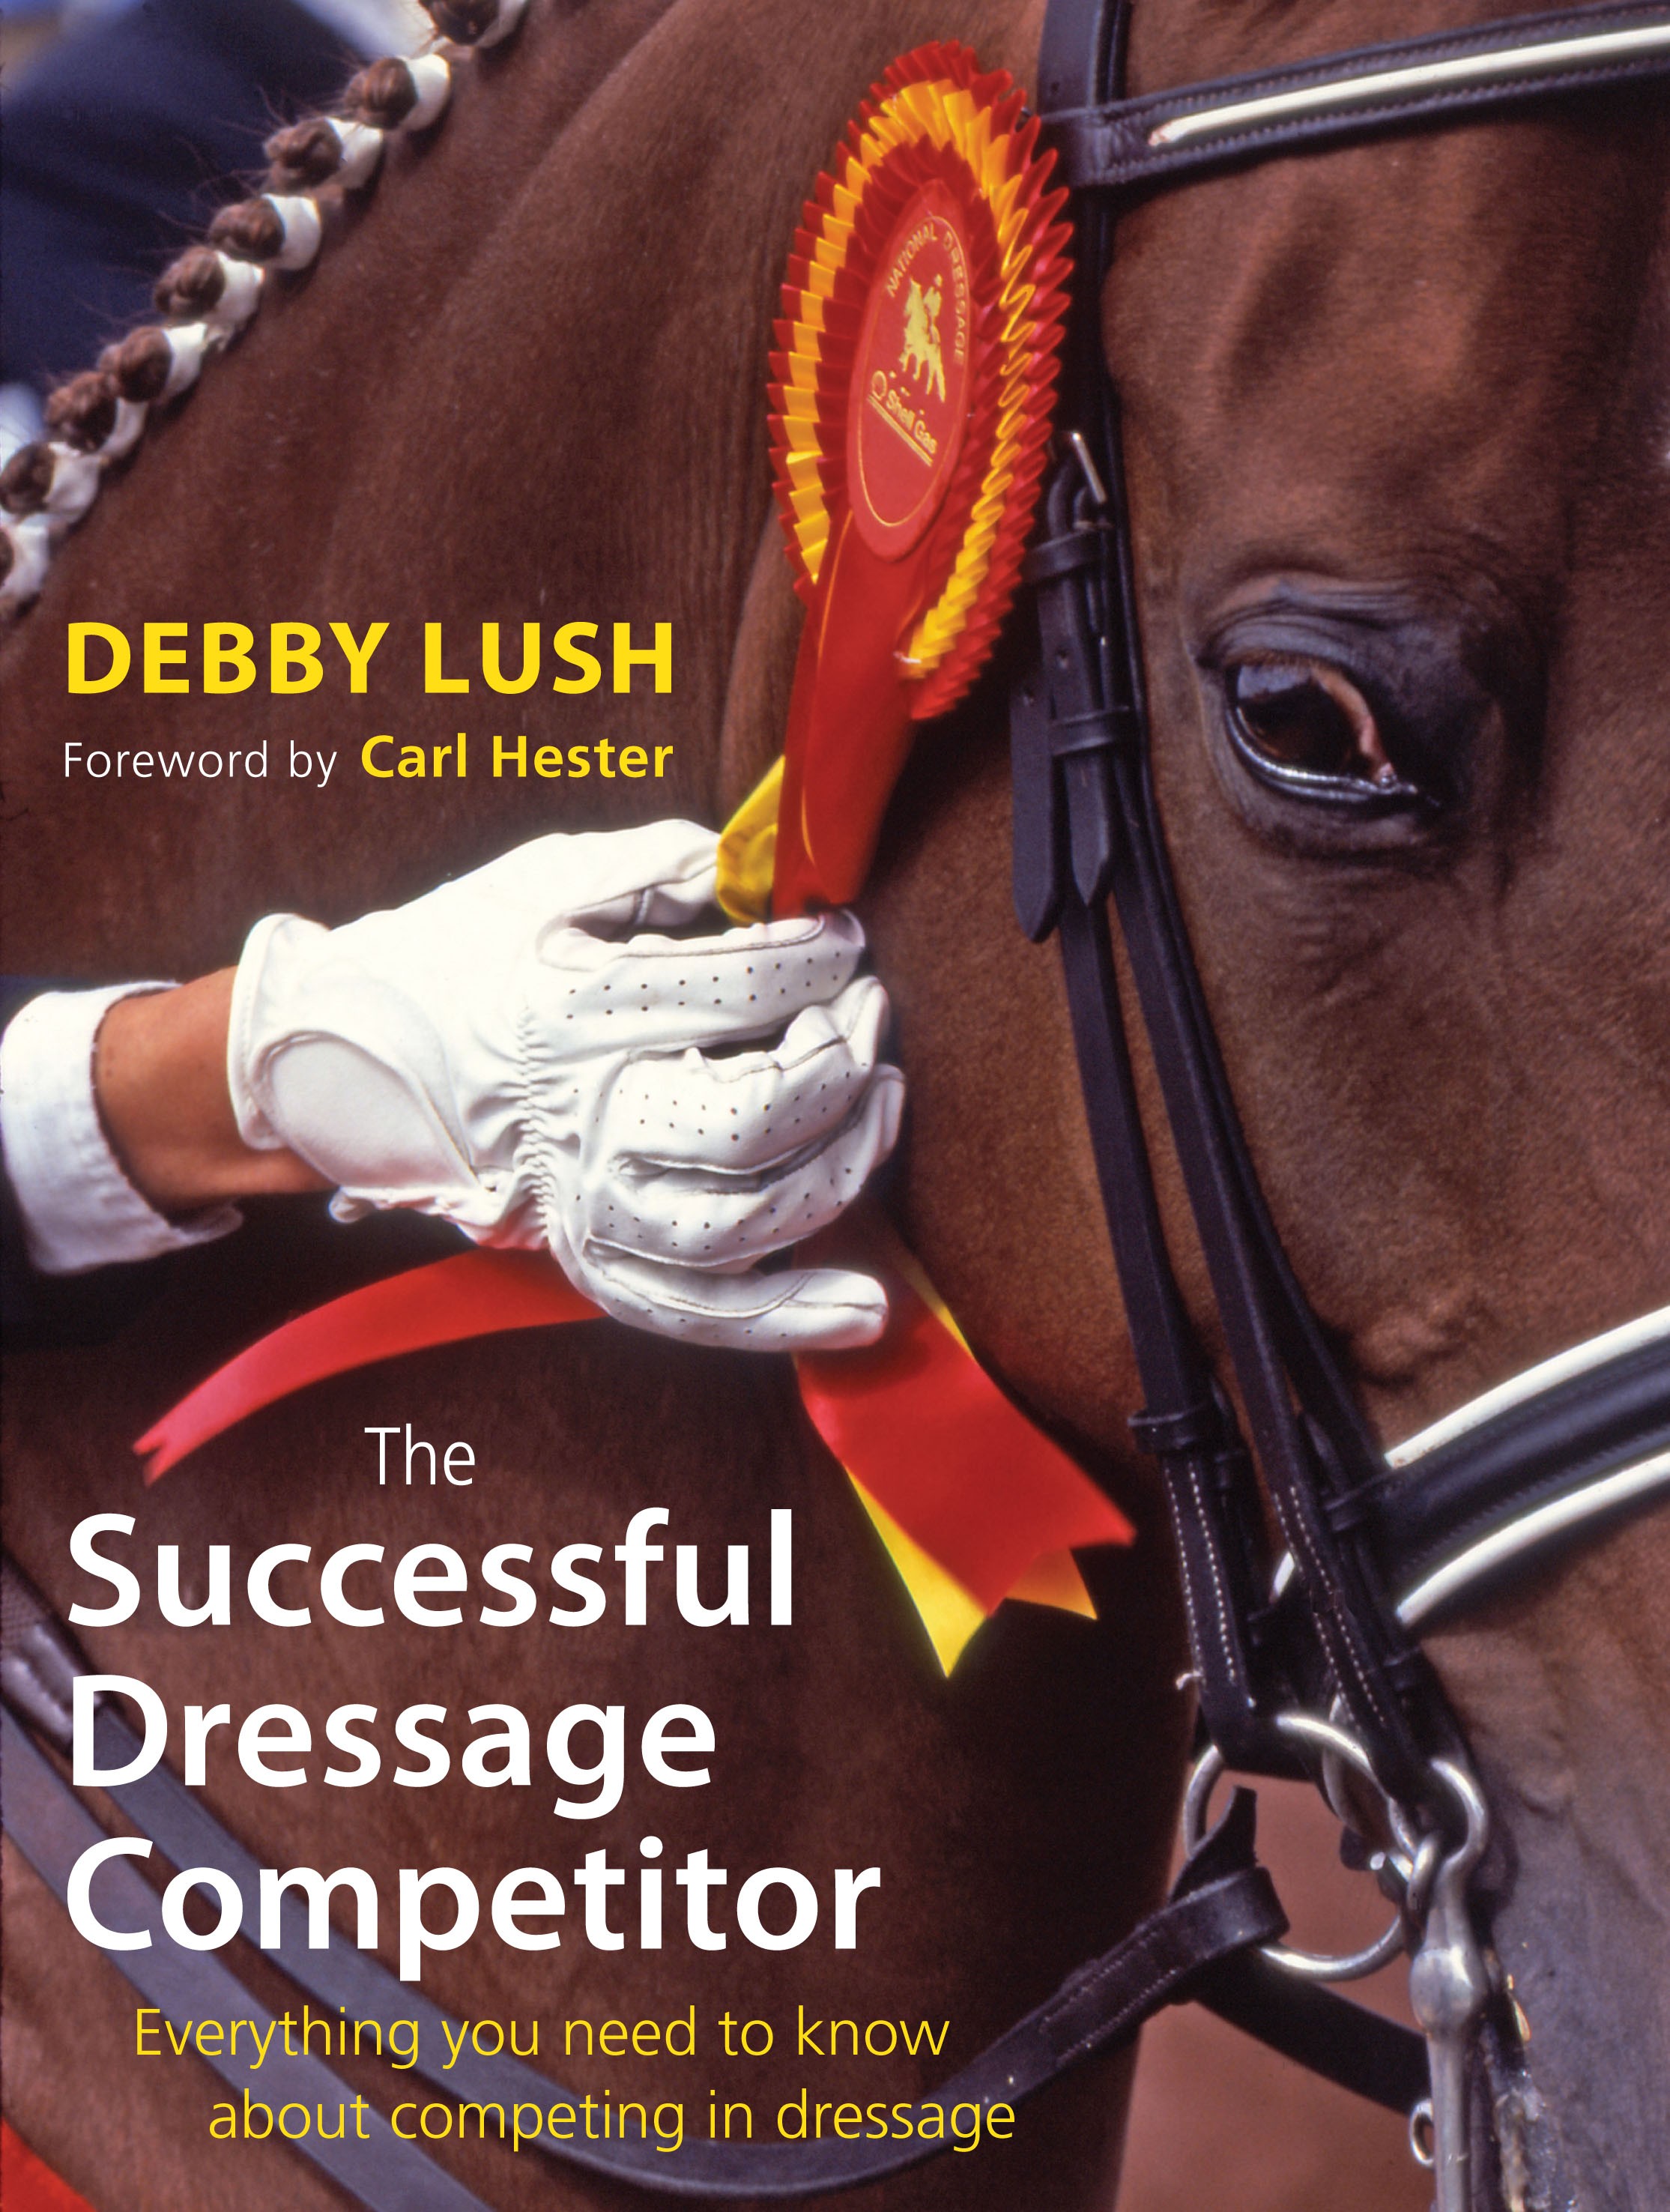 The Successful Dressage Competitor by Debbie Lush from trot-online